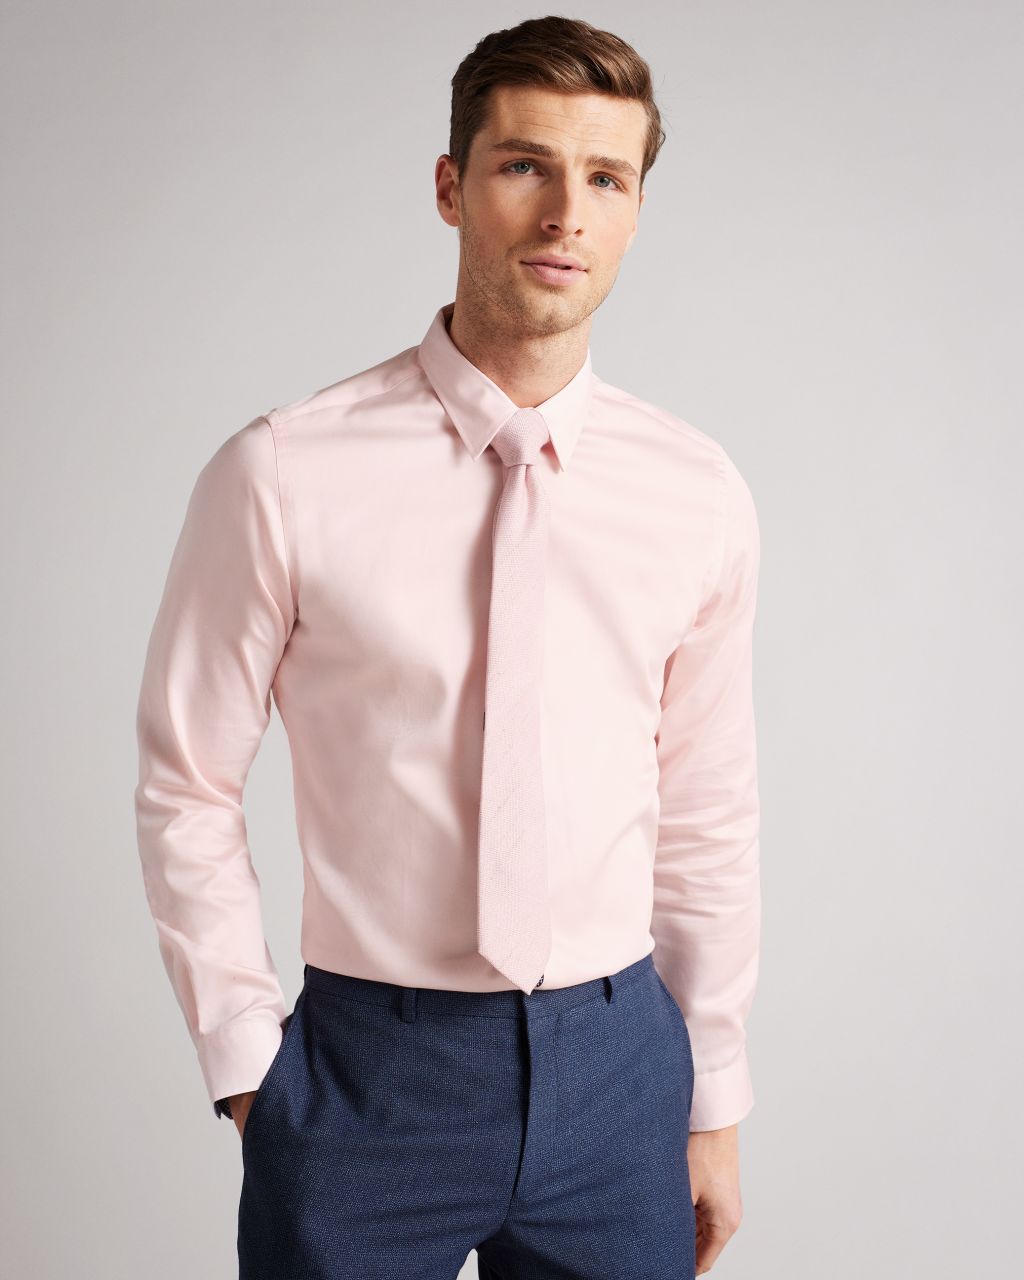 Ted Baker Men's Long Sleeve Slim Fit Shirt in Pale Pink, Maeloss, Cotton